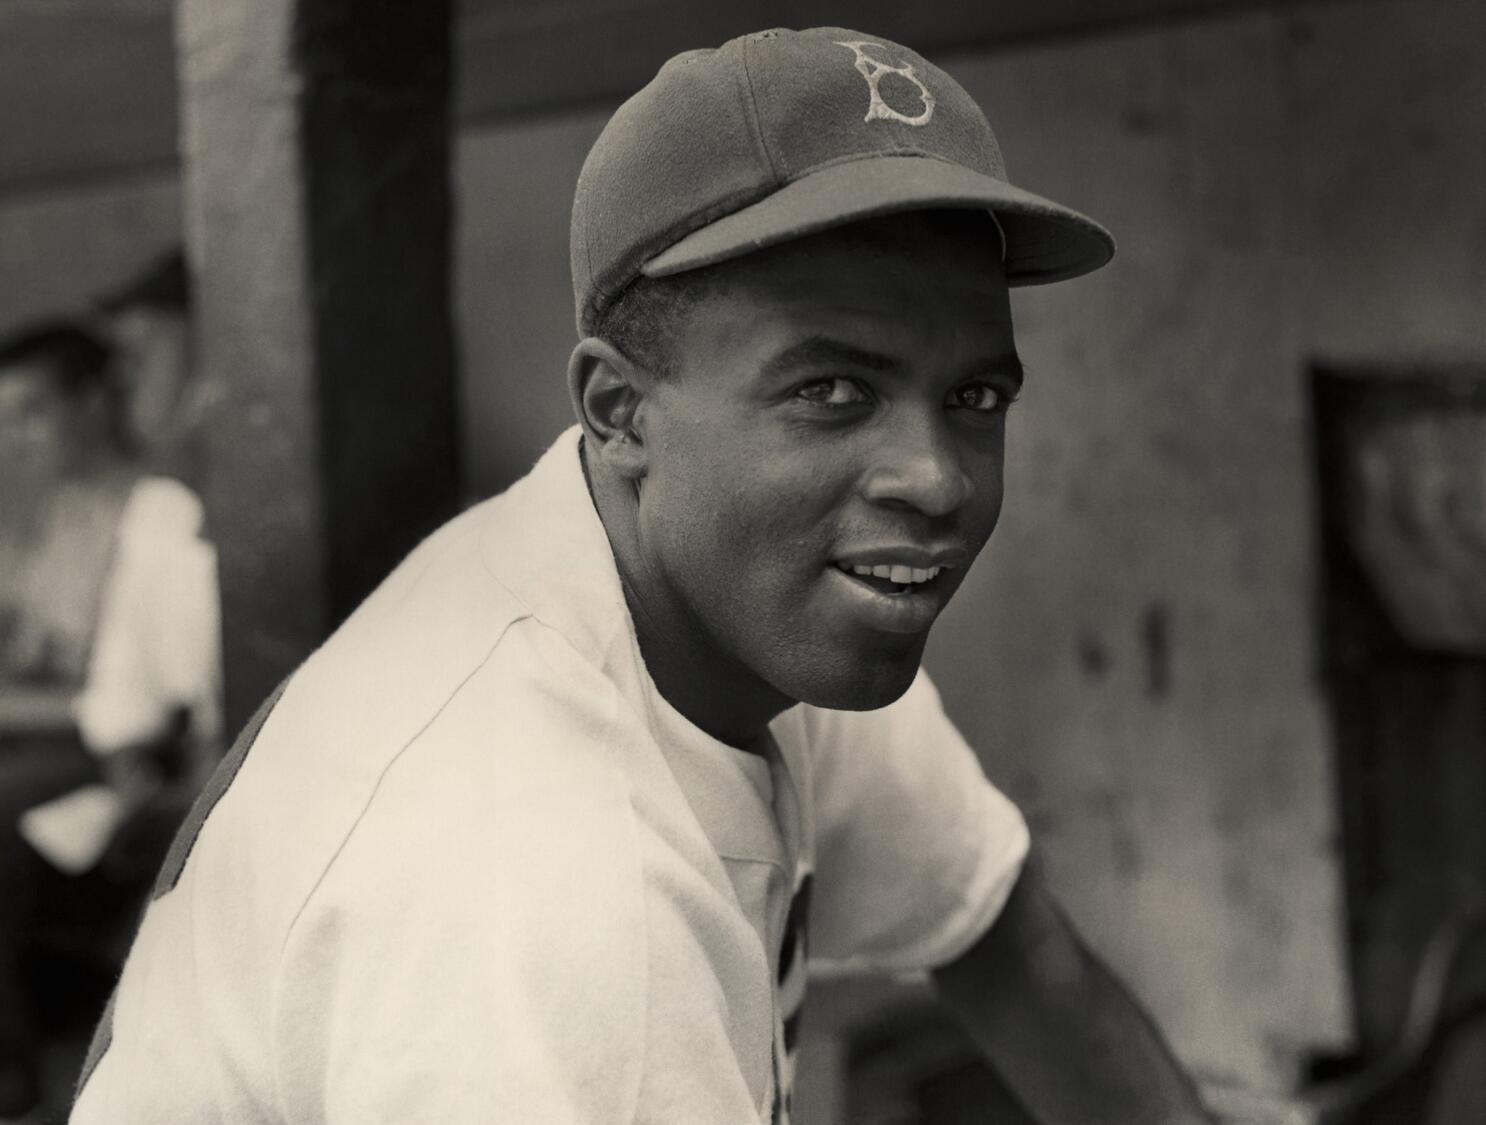 UCLA unveils '42' monument for Jackie Robinson